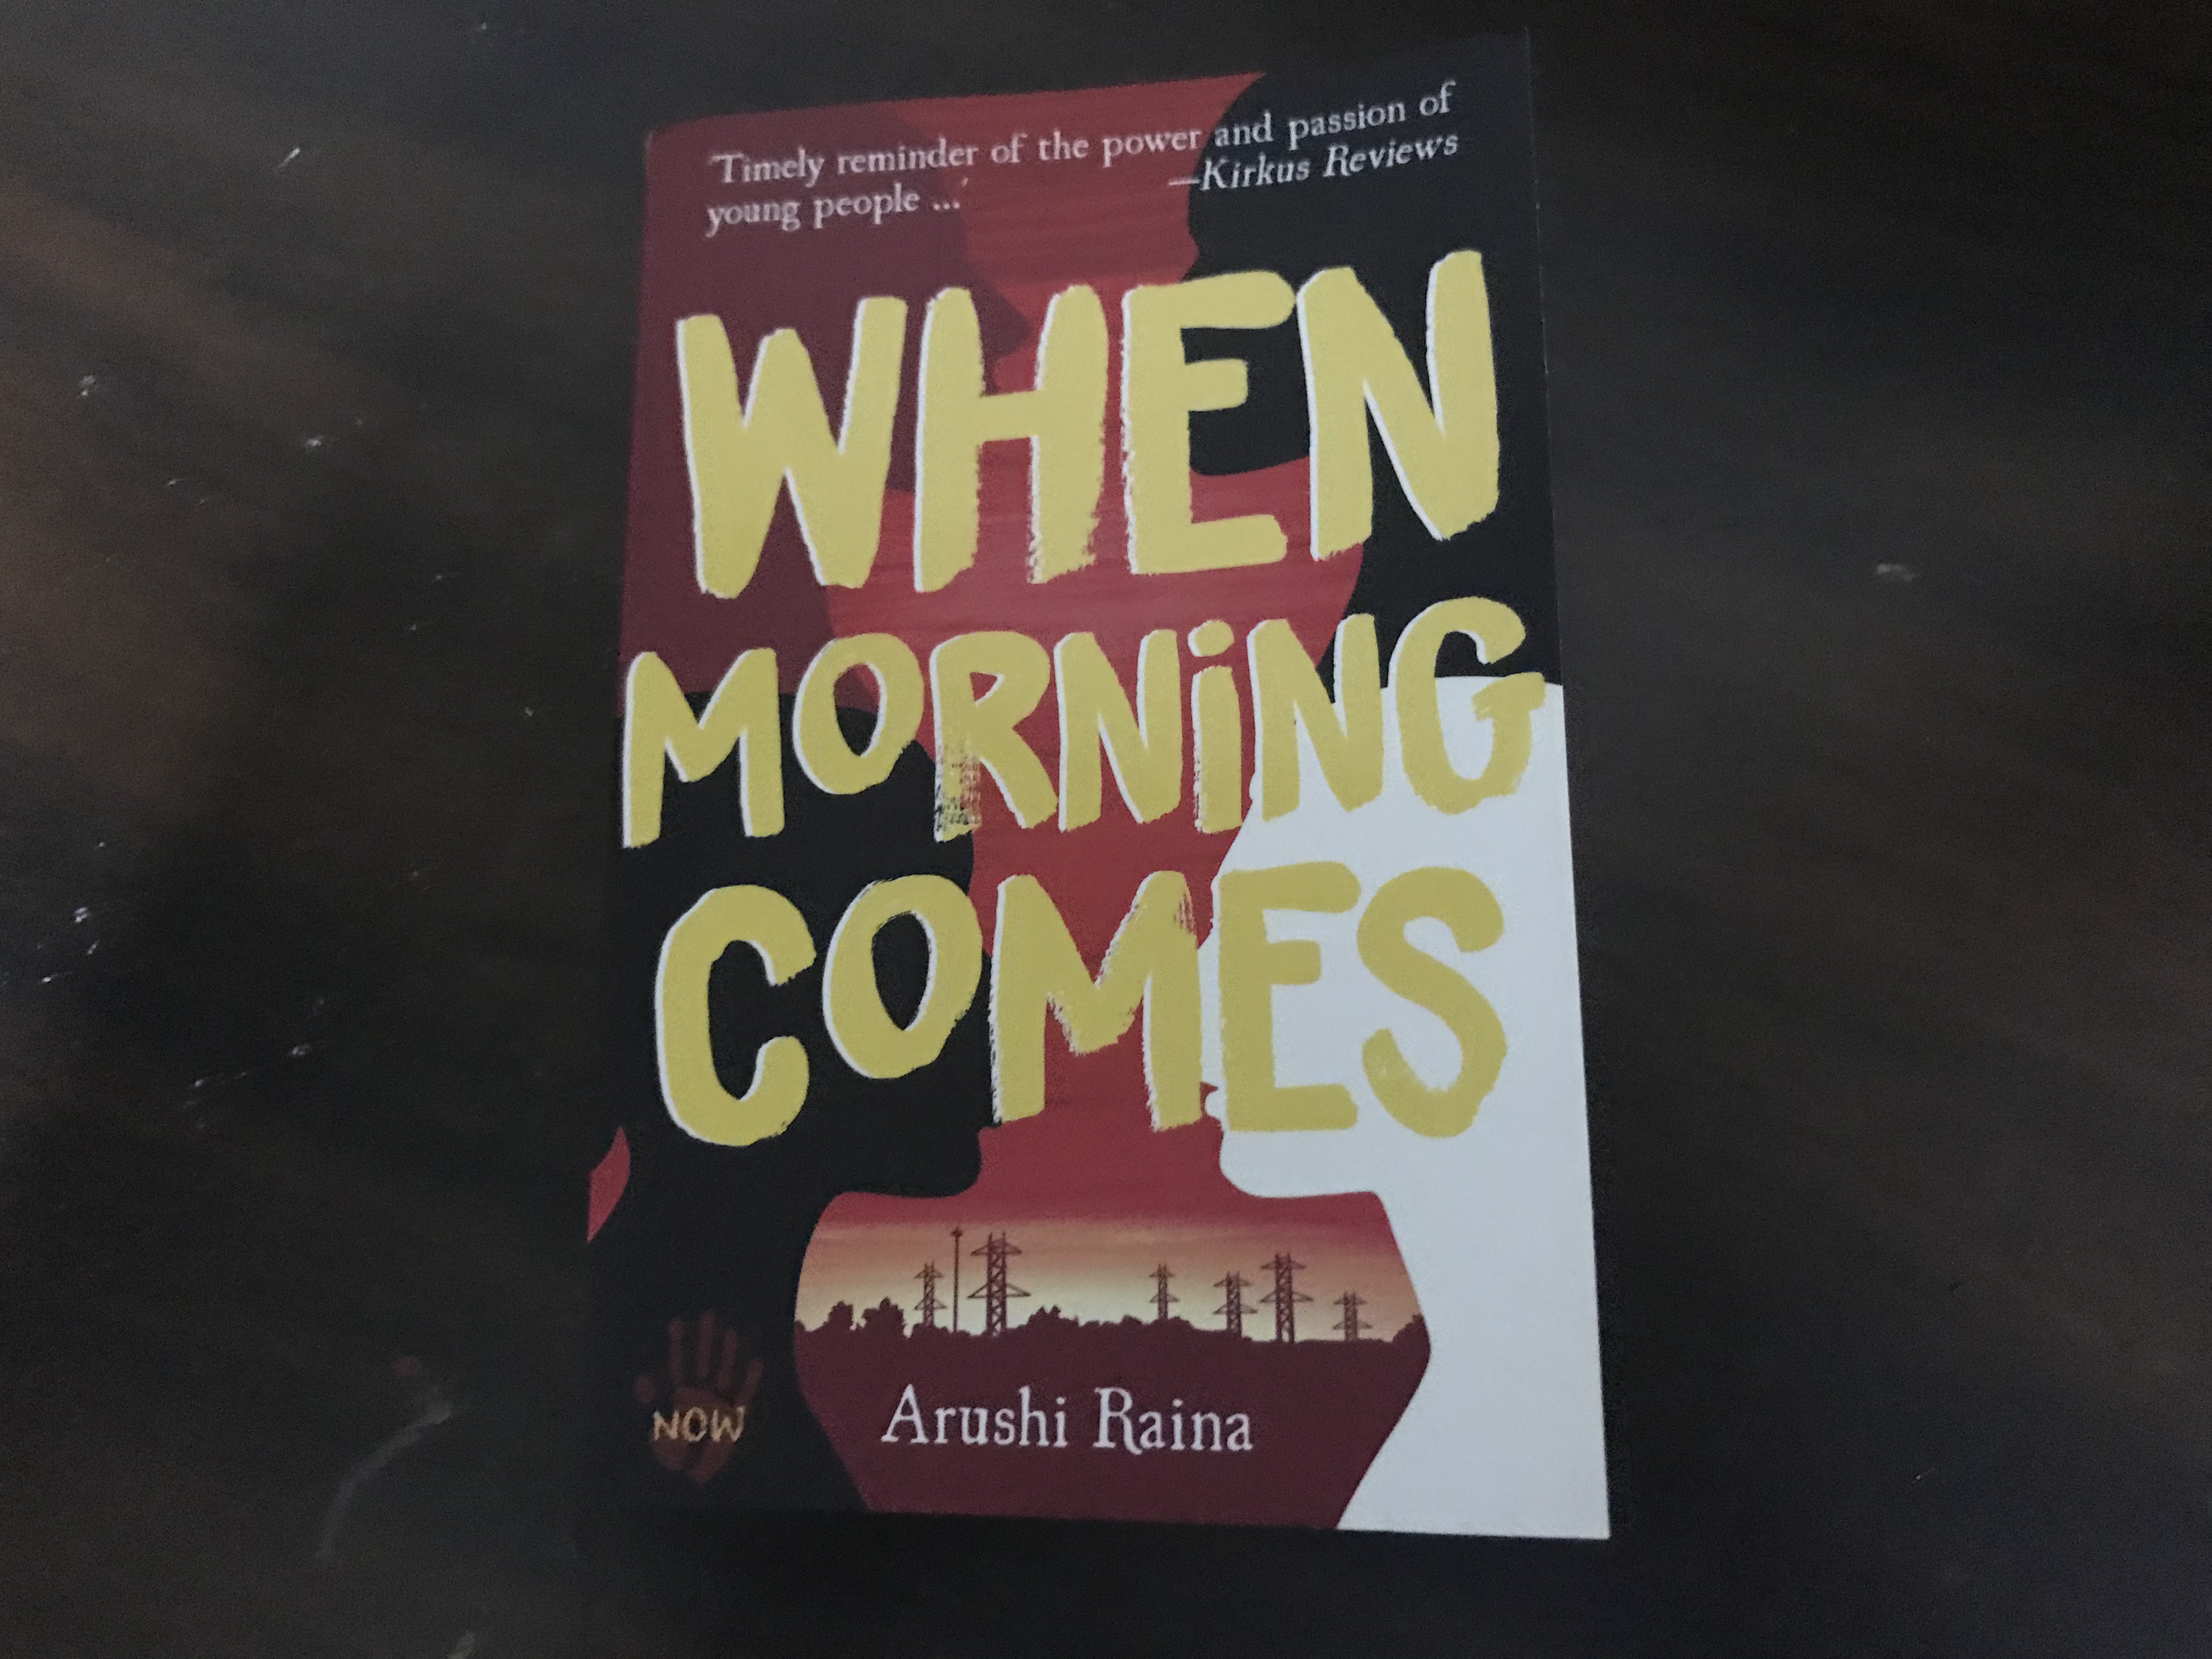 Read more about the article When Morning Comes by Arushi Raina: Duckbill brings a potent saga of youth caught in turmoil, as a part of the “Not Our War” series